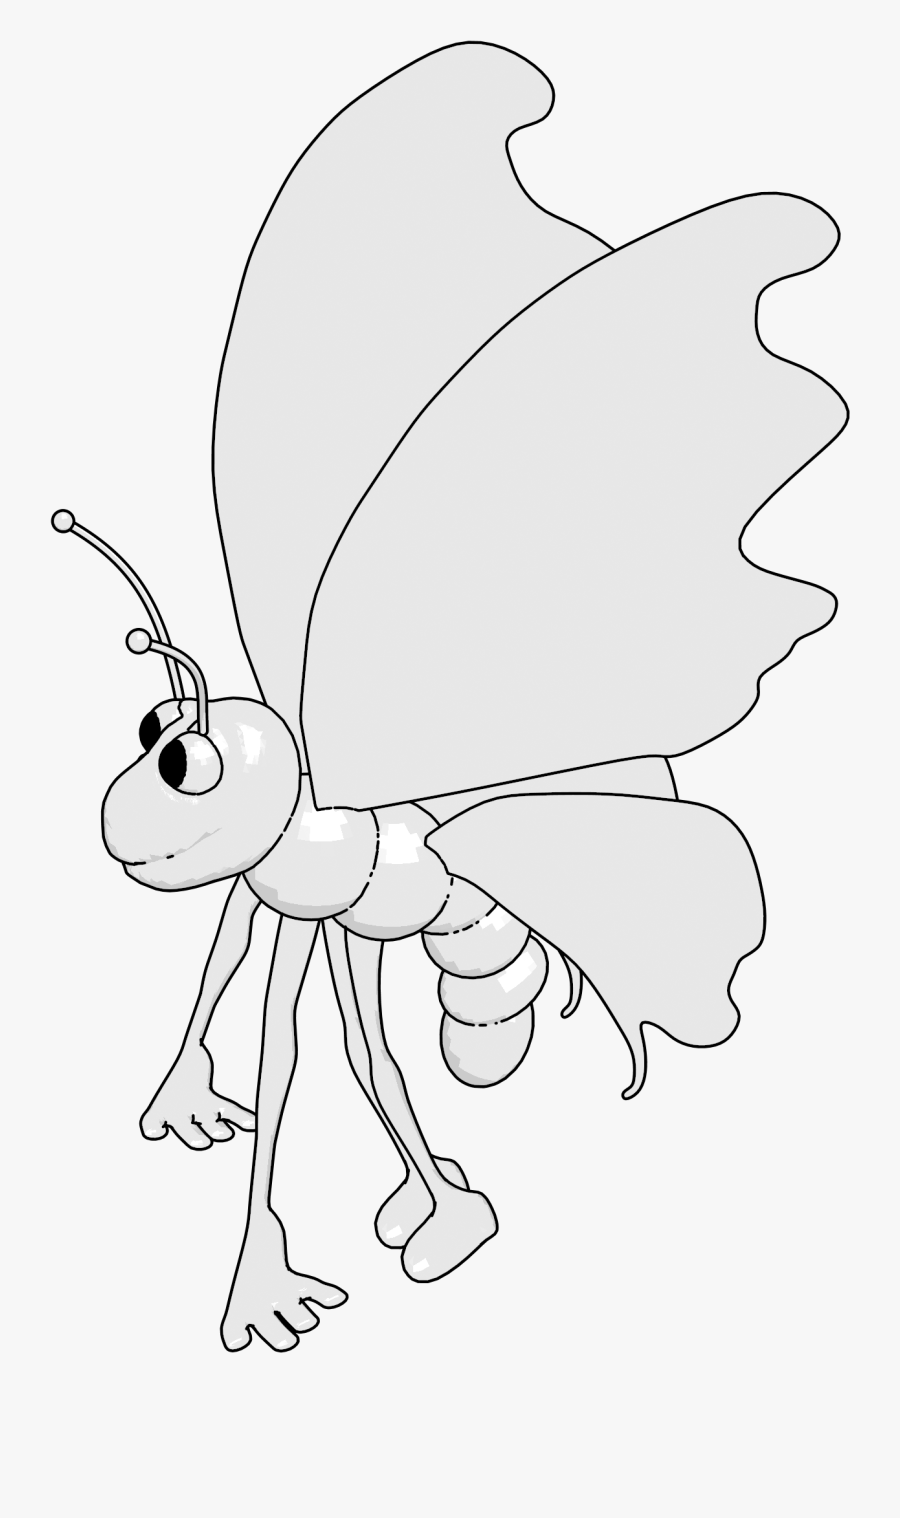 Butterfly Cartoon Png Clipart - Illustration, Transparent Clipart